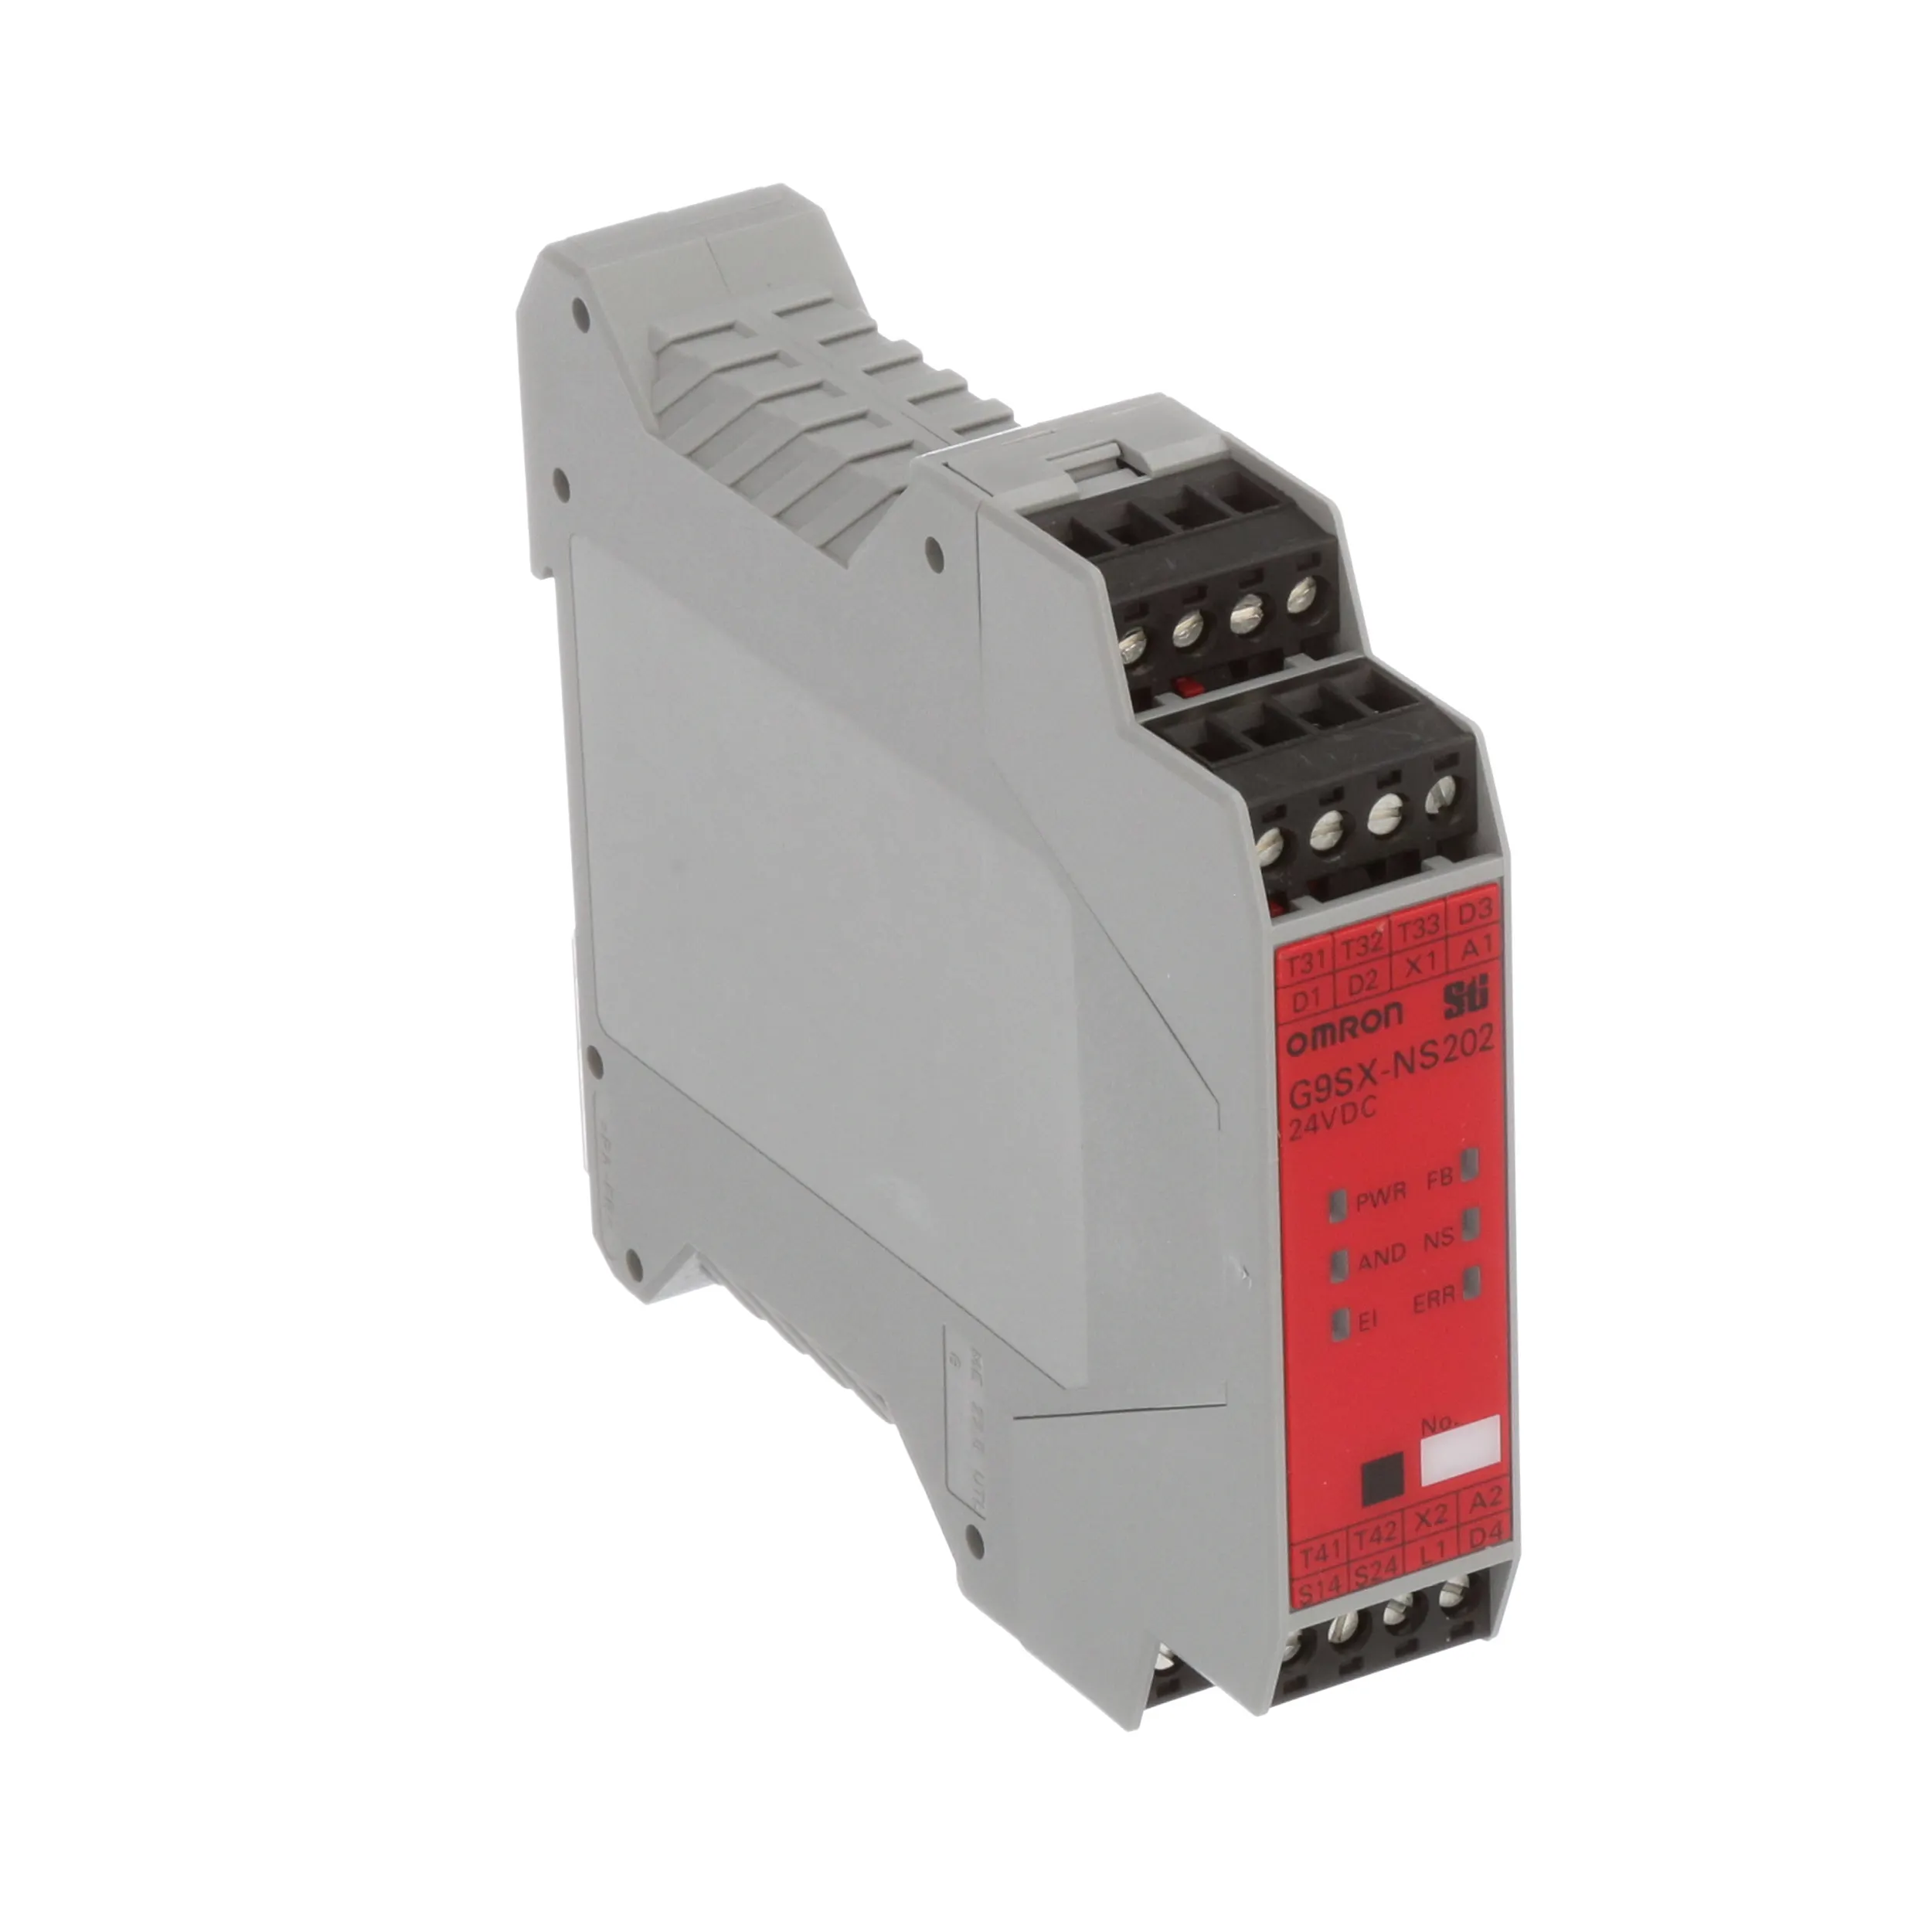 OMRON G9SX-NS202-RT DC24 SAFETY RELAY